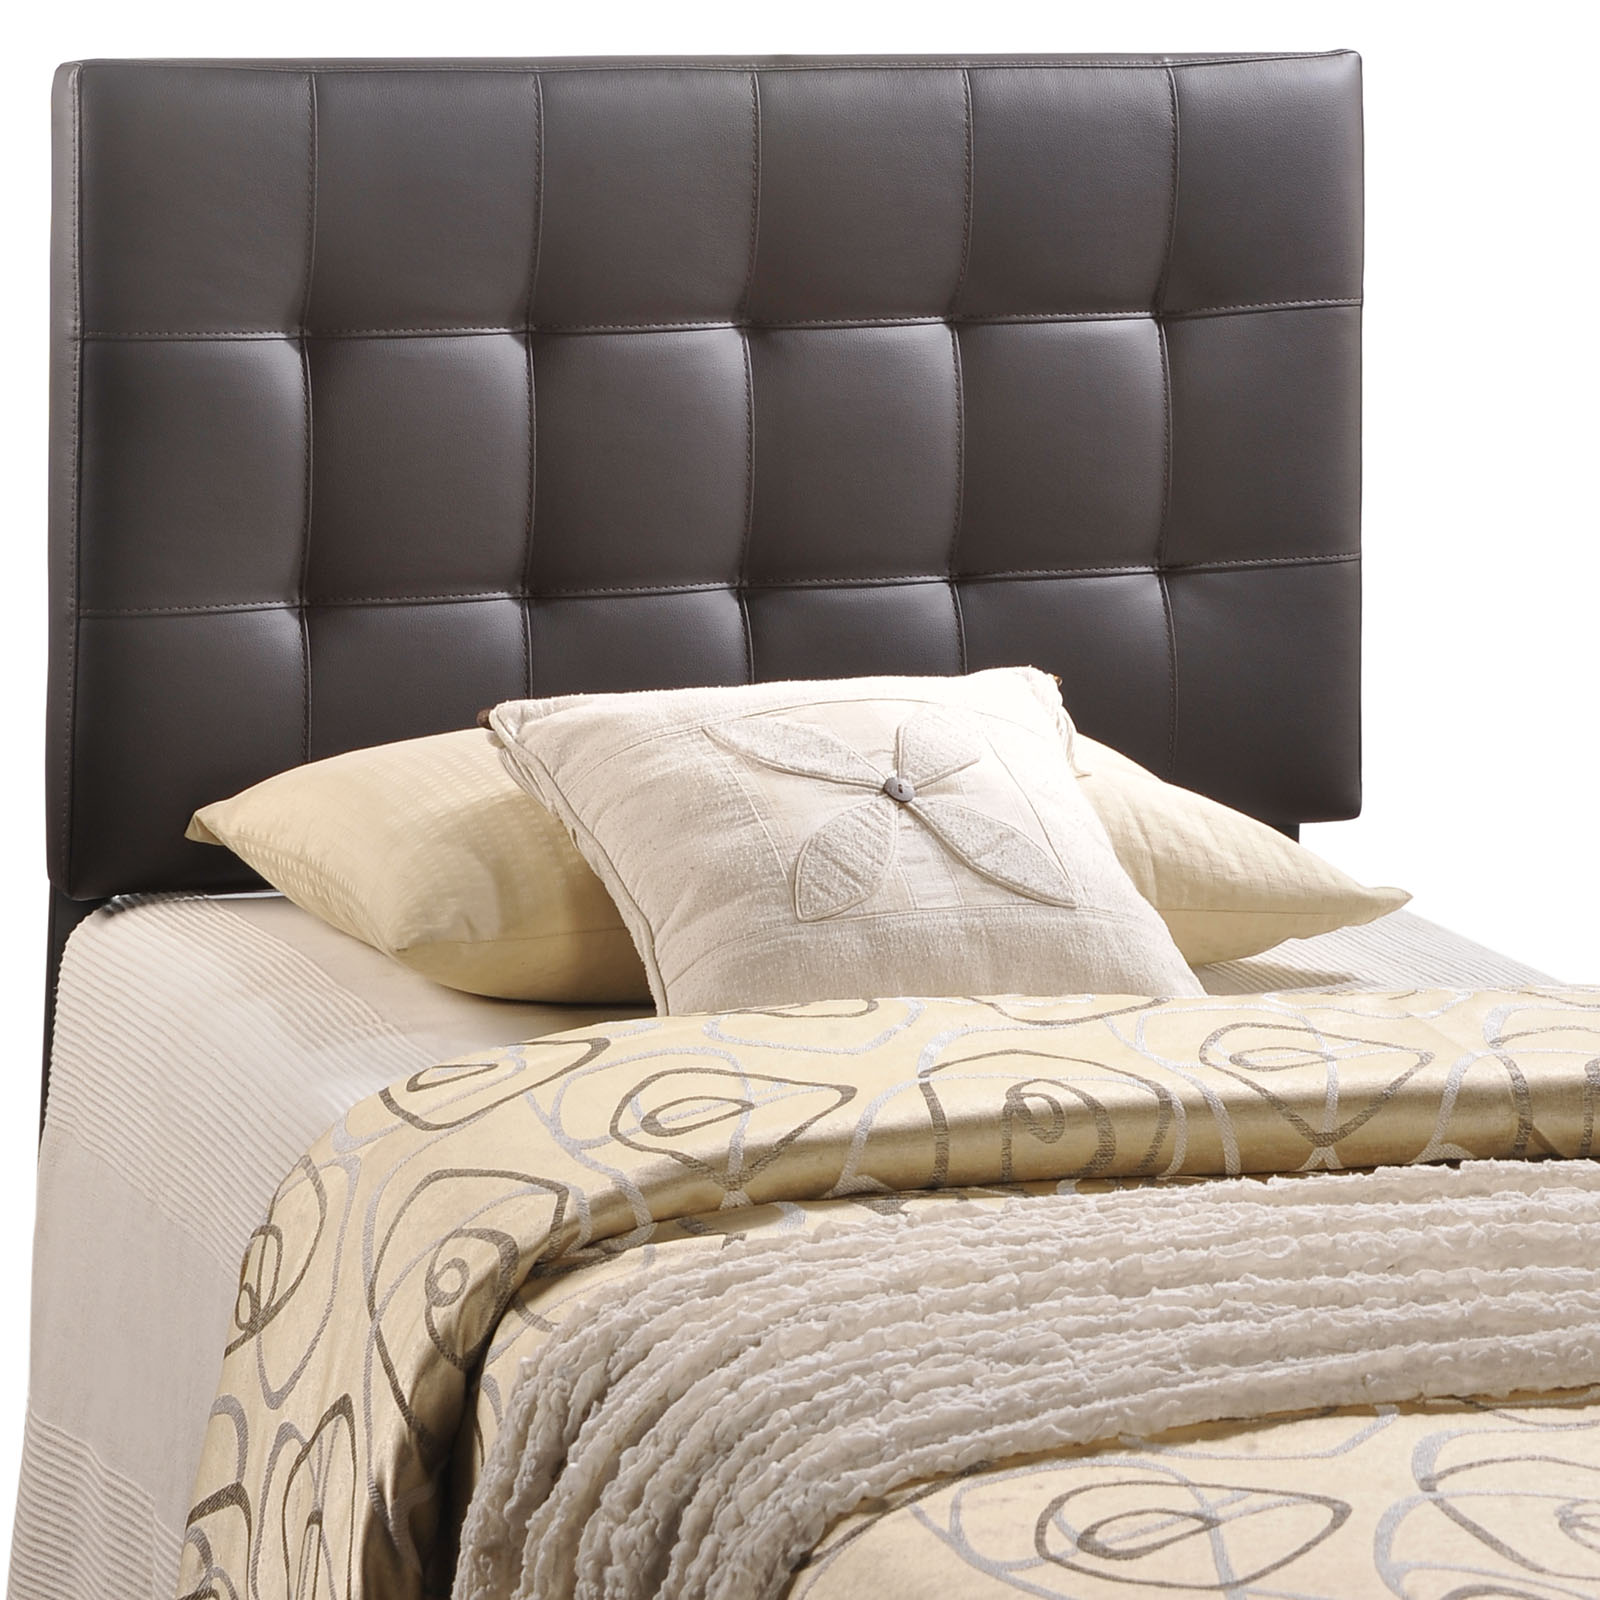 Modway Lily Twin Upholstered Vinyl Headboard in Brown - image 5 of 5